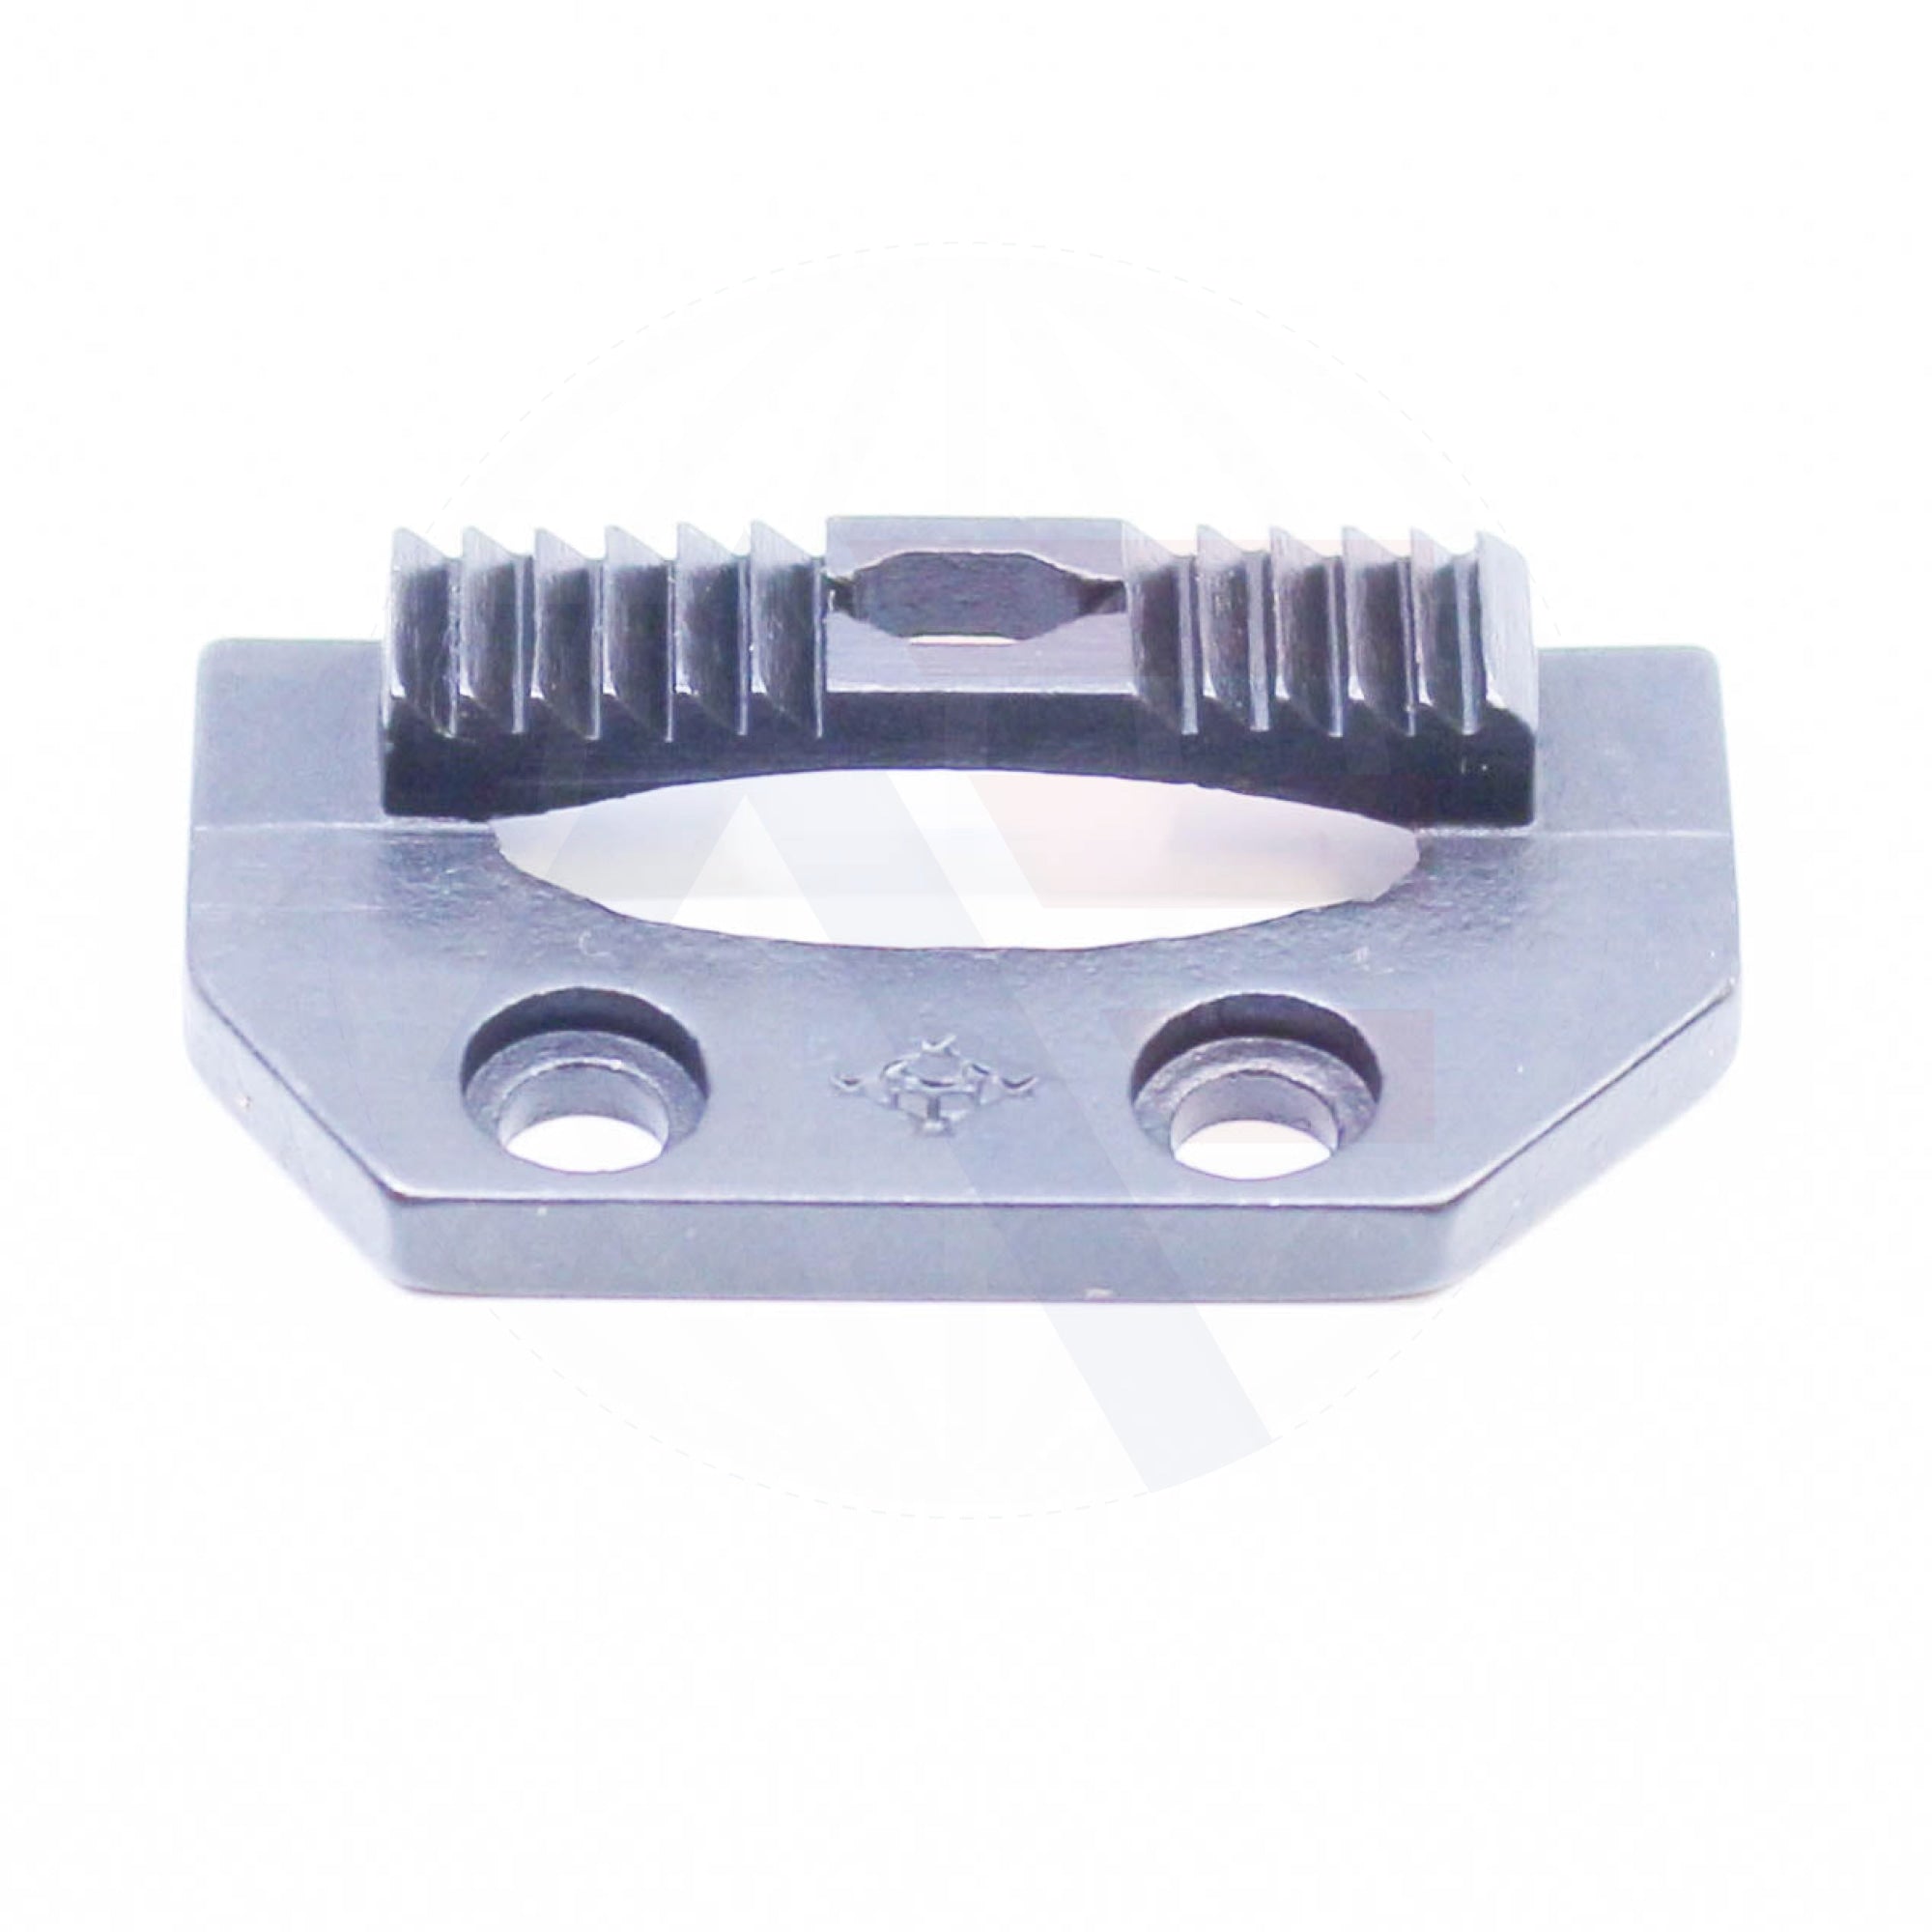 18031Sc Feed Dog Sewing Machine Spare Parts